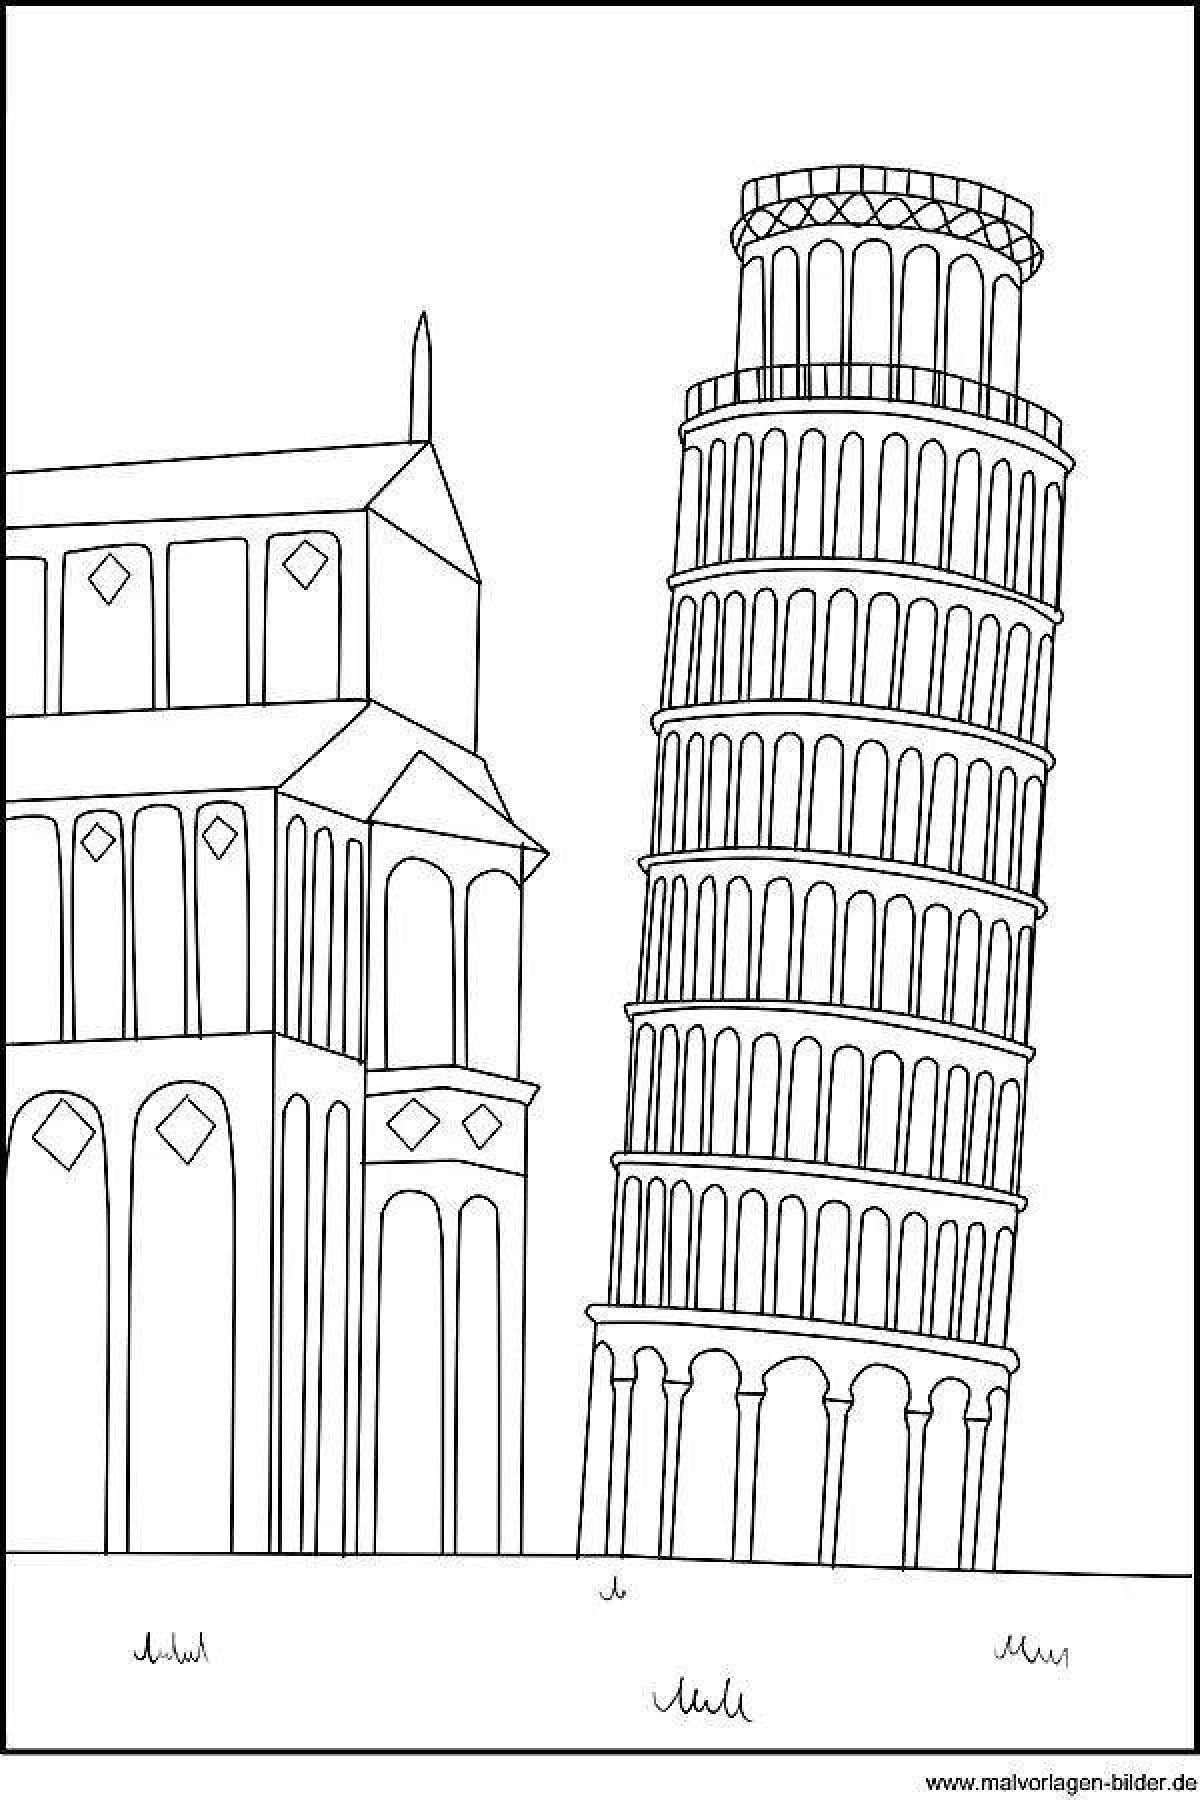 Amazing Leaning Tower of Pisa coloring book